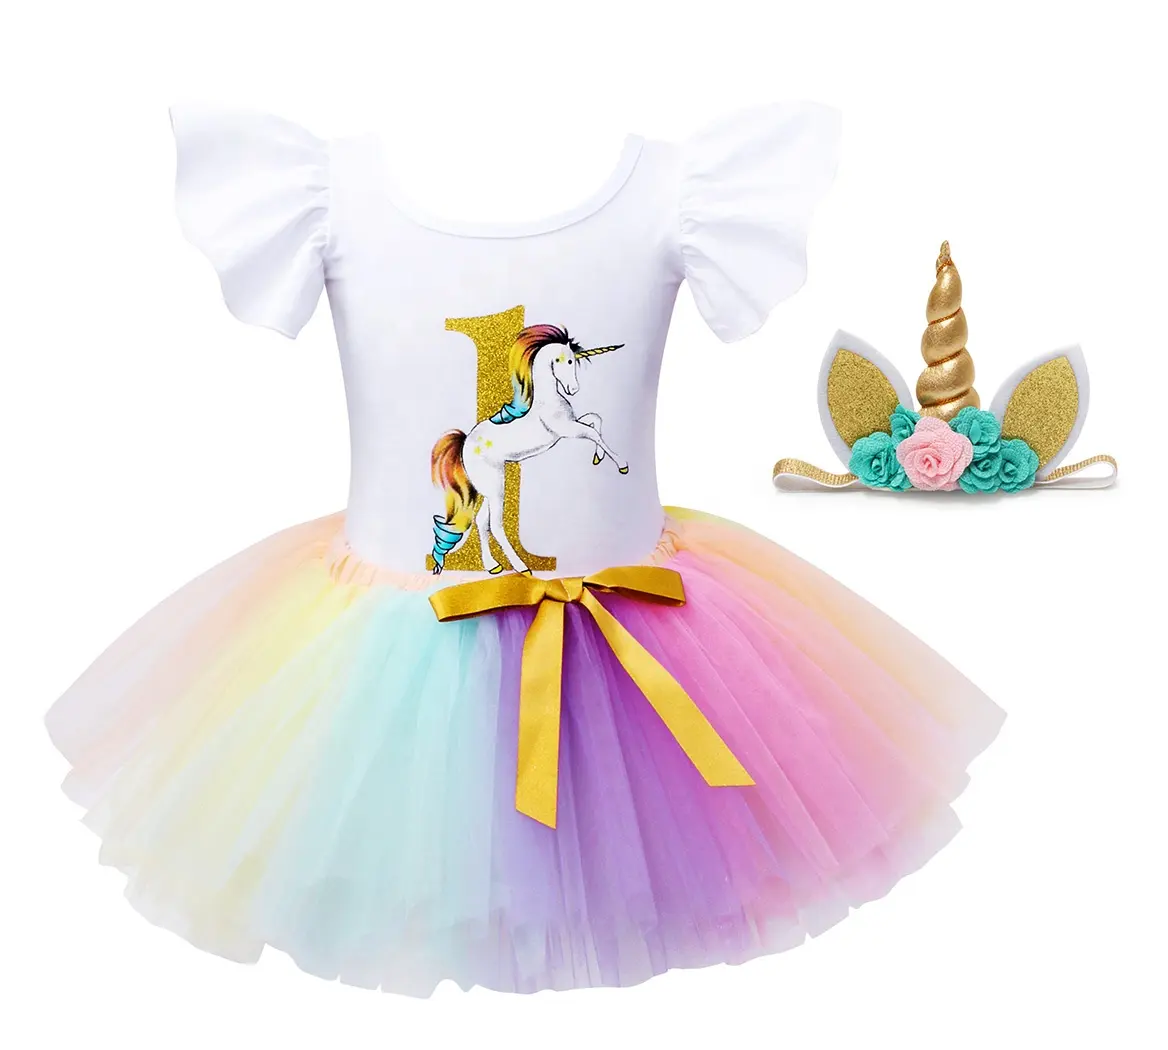 New Arrival Baby Girl Birthday Dress 1 Years Old Colorful Gauze Bow With Lotus Leaf Sleeve Unicorn Design Dress and Heirlooms